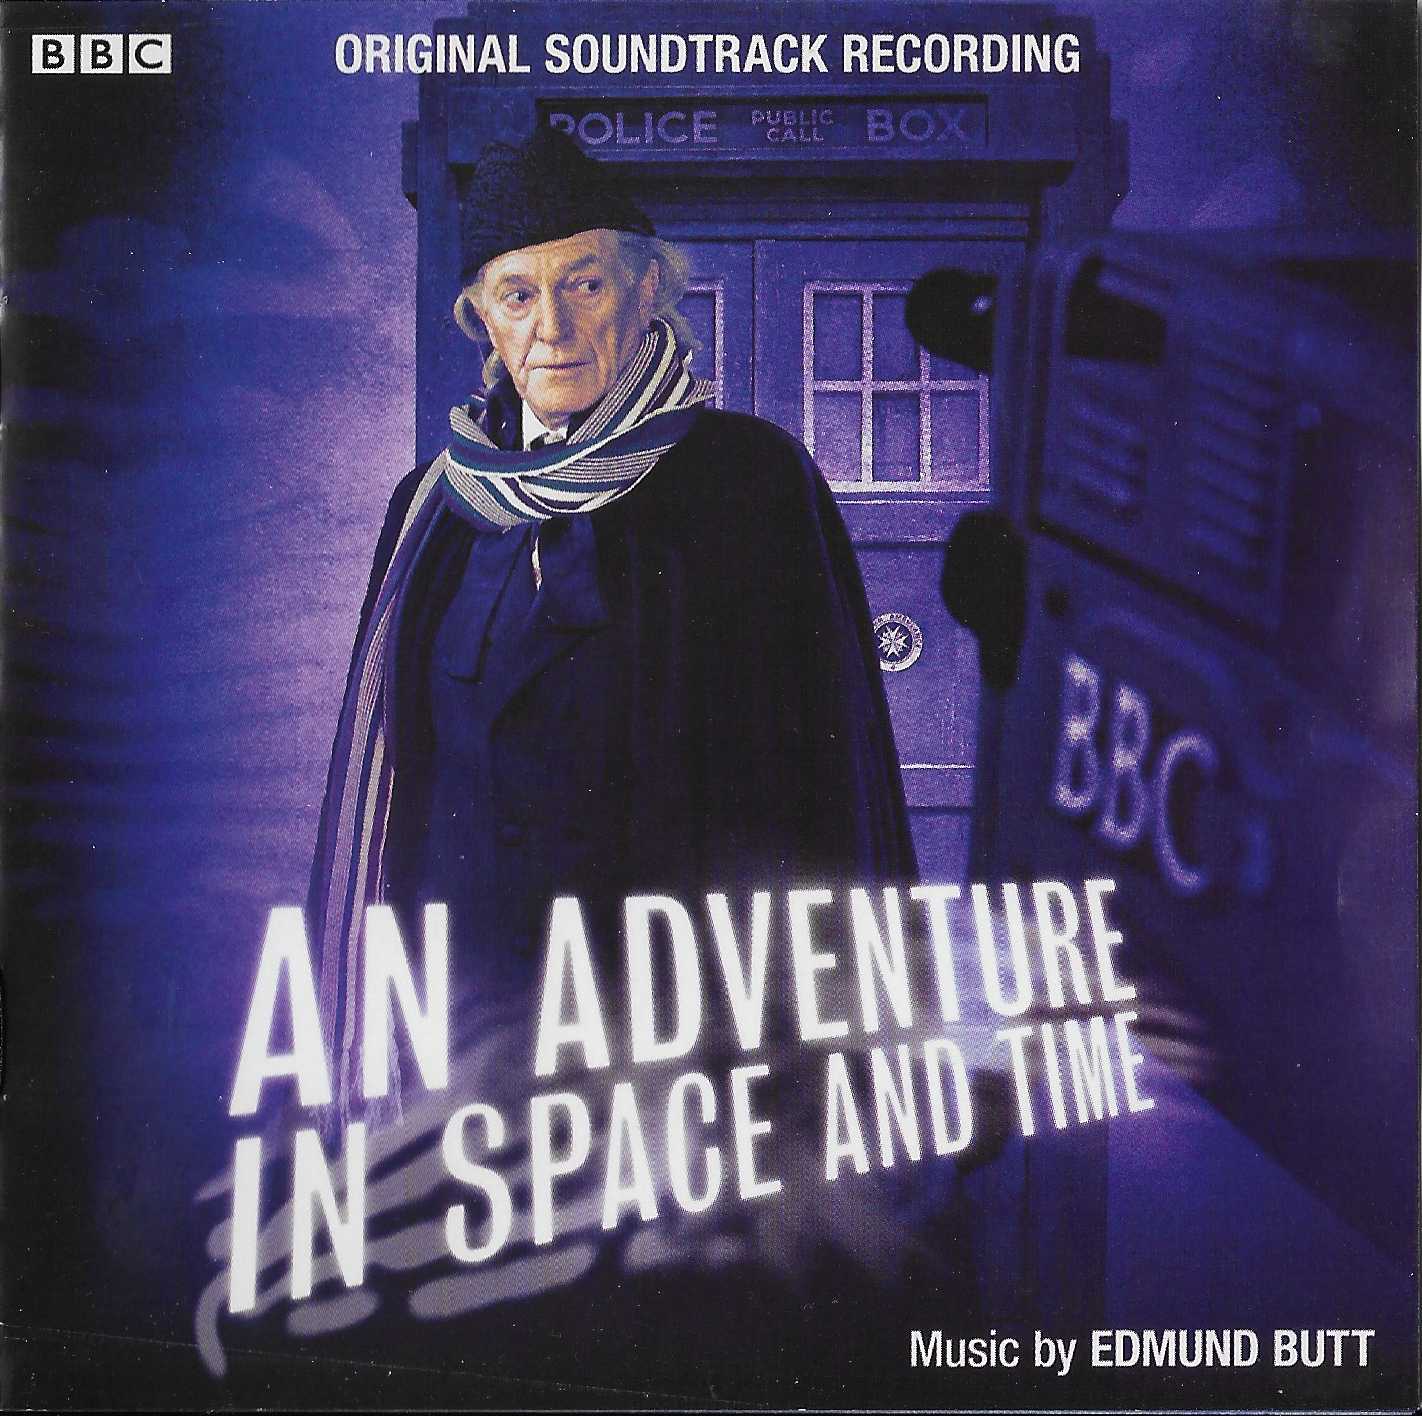 Picture of Doctor Who - An adventure in space and time by artist Edmund Butt from the BBC cds - Records and Tapes library